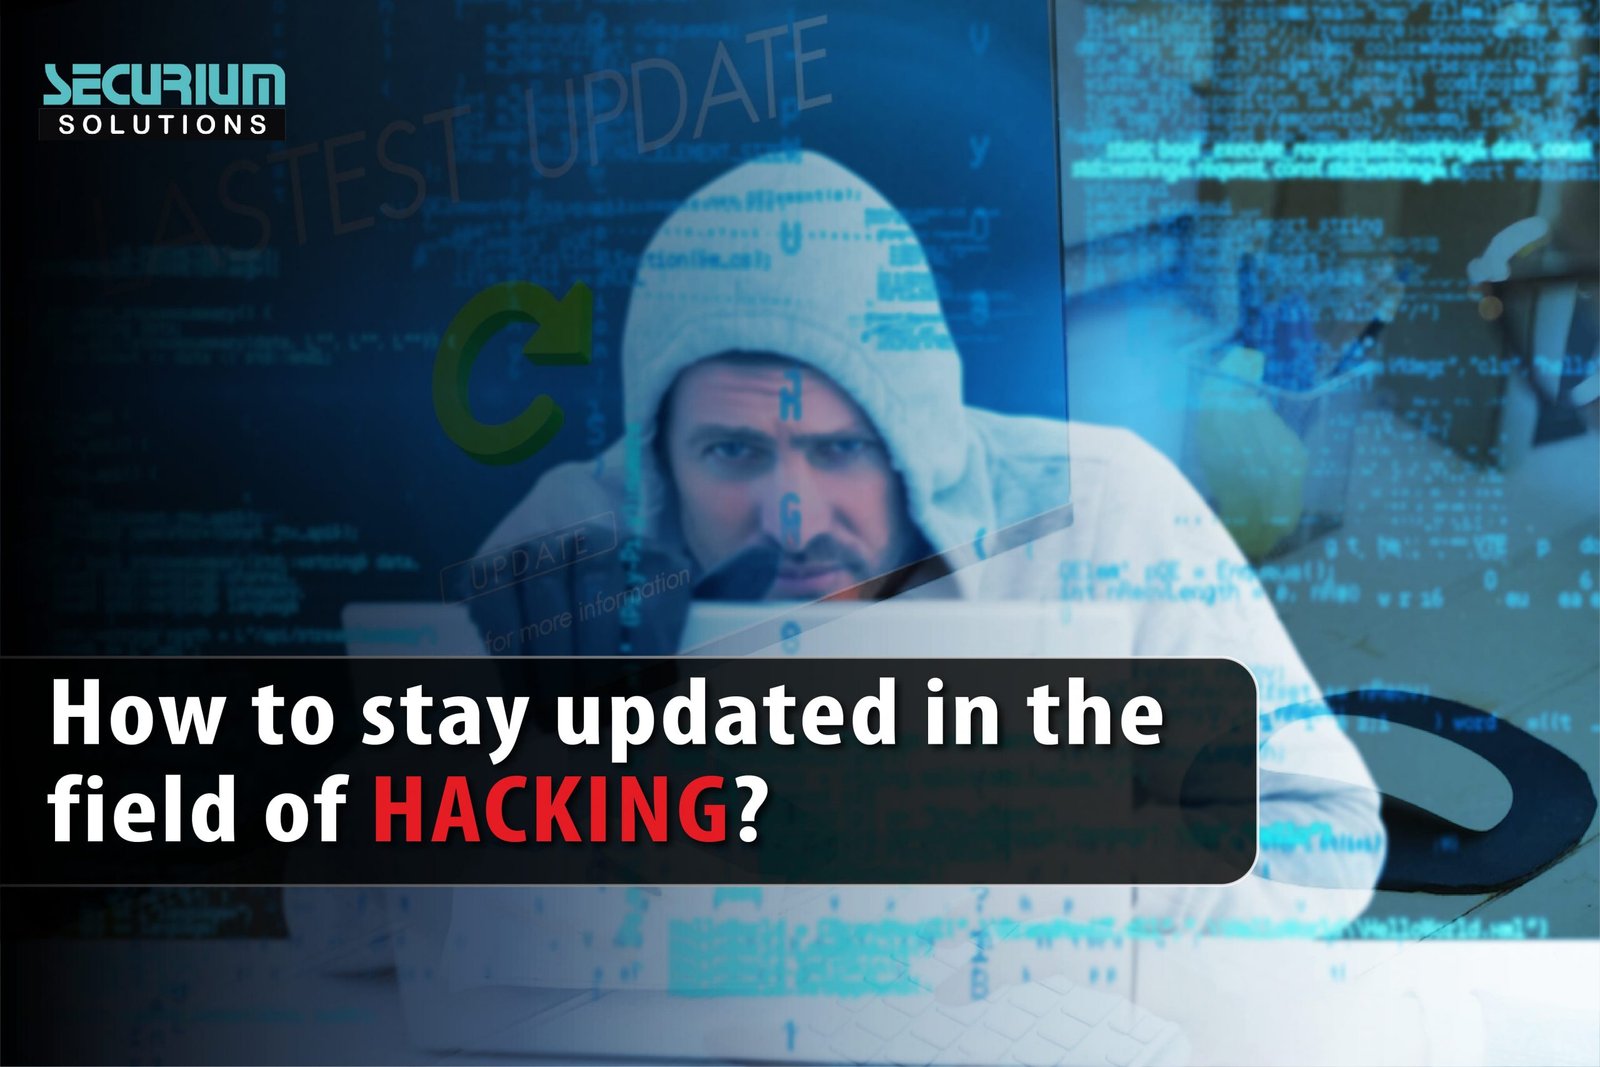 Stay updated in the field of hacking